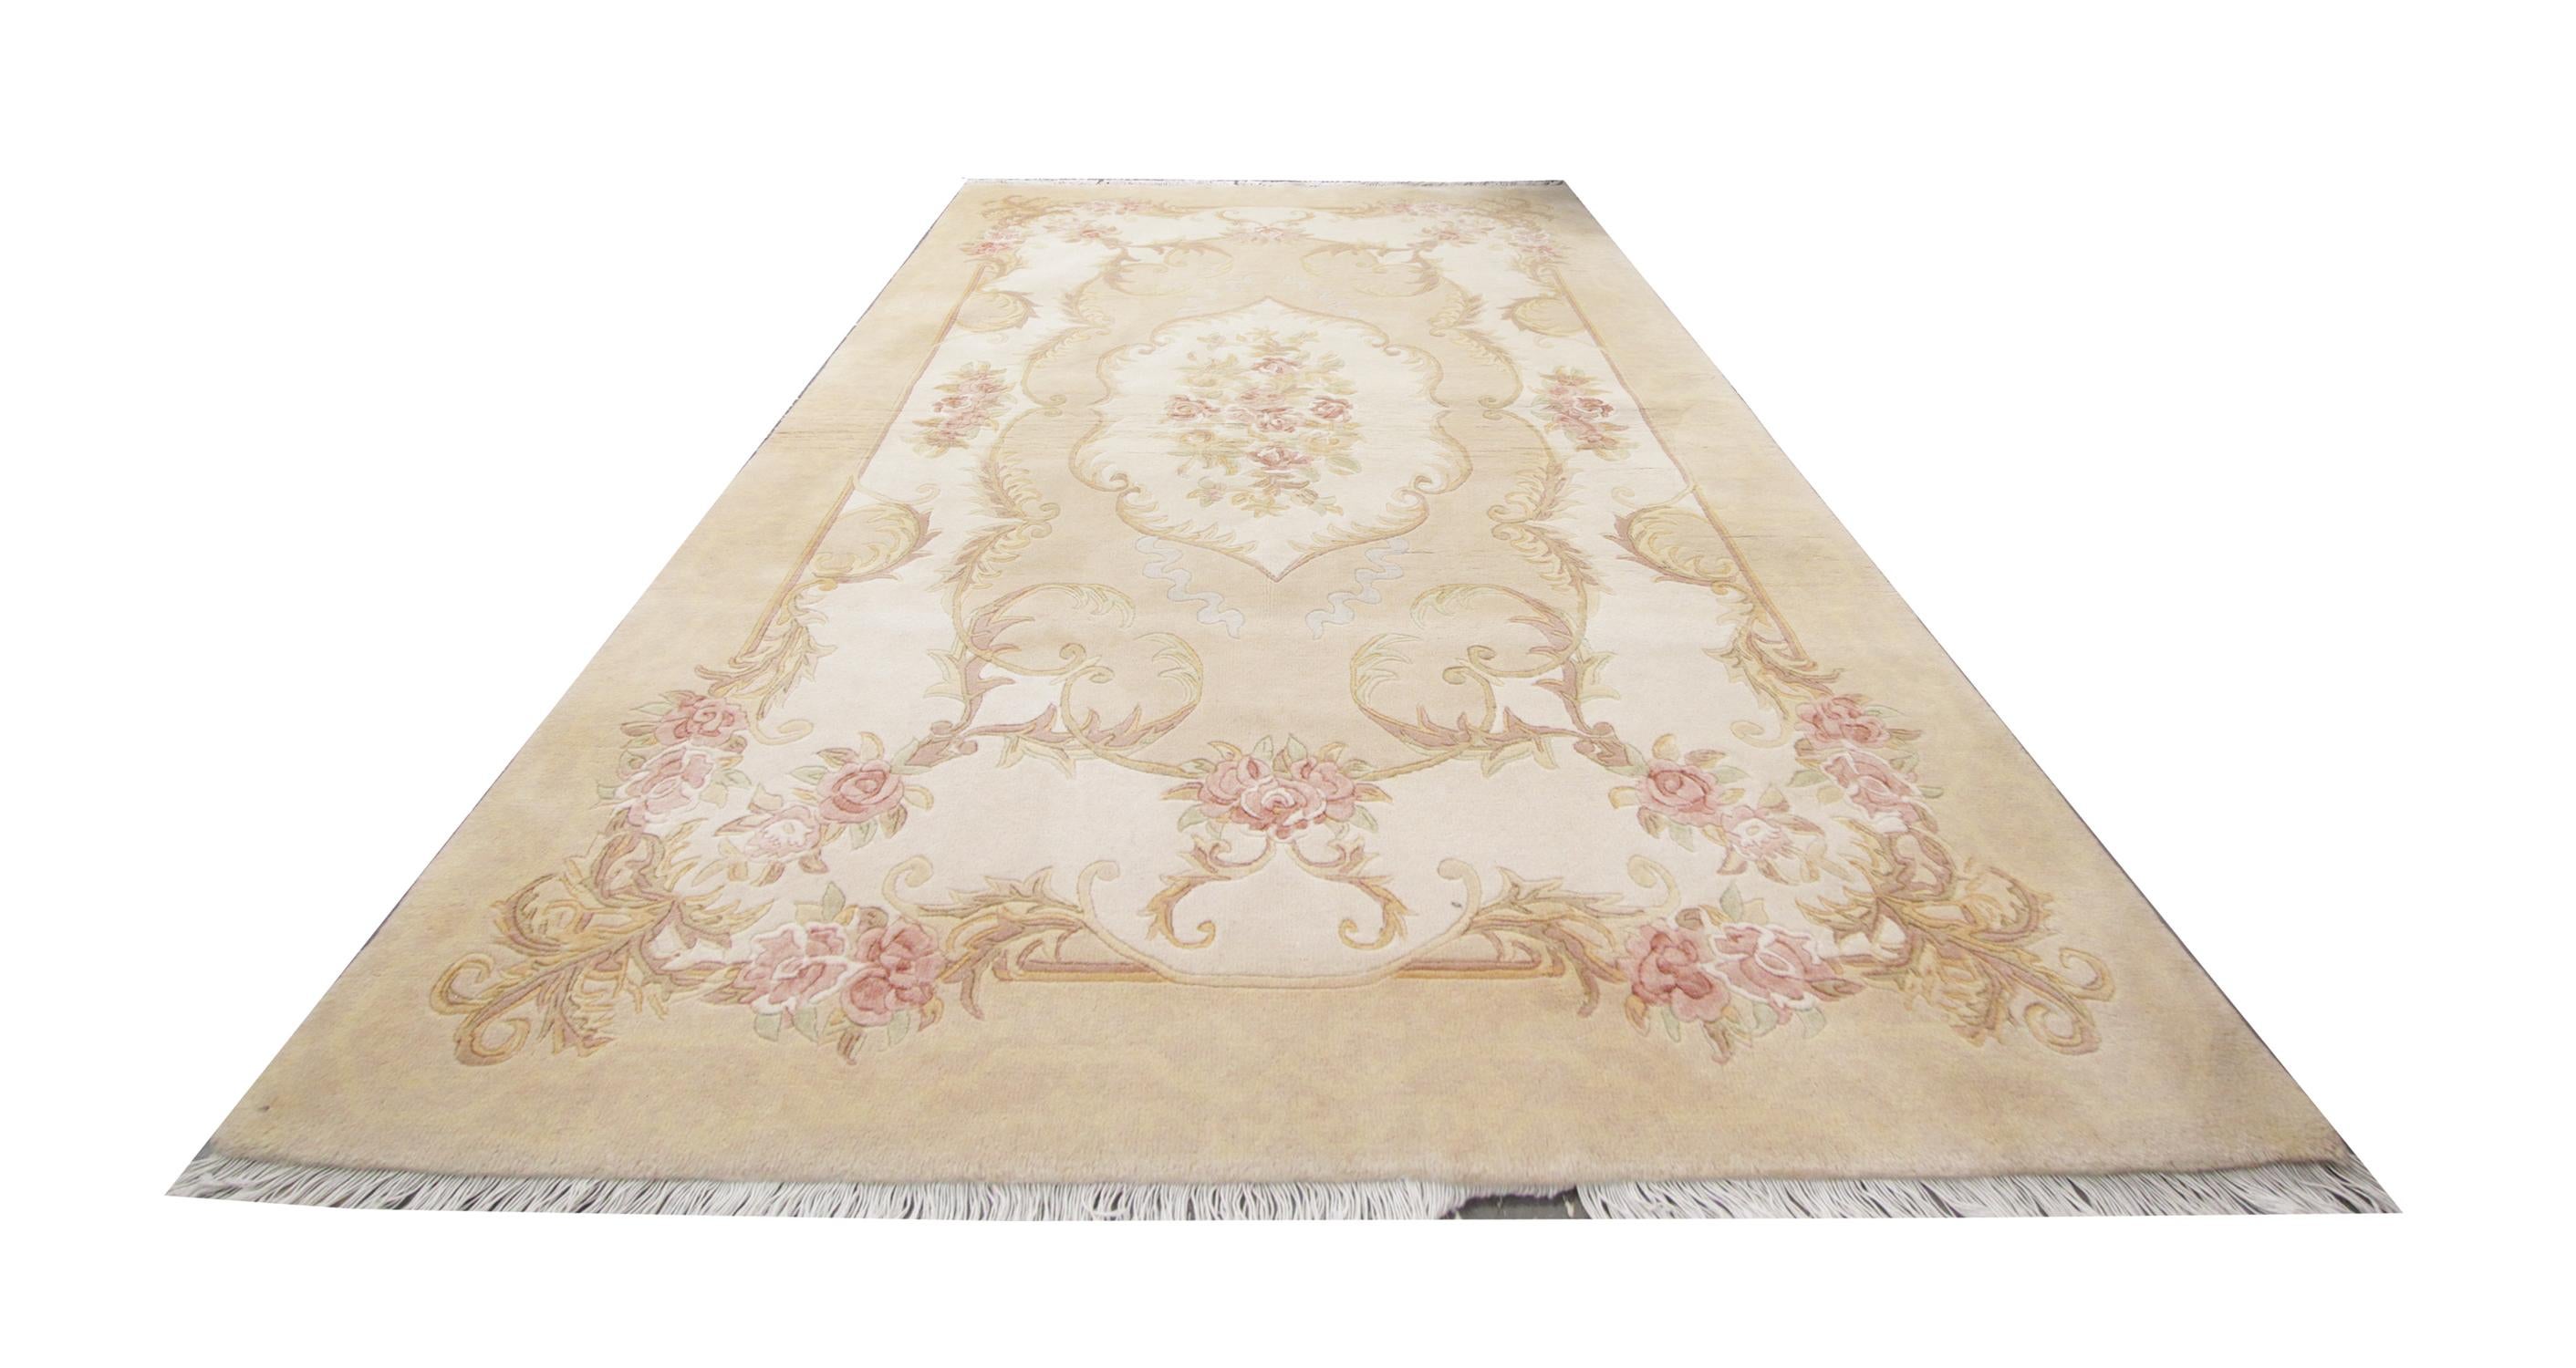 This wool rug is one of the unusual oriental rugs of the 1970s, which are Art Deco rugs in excellent condition with a Cream background colour contrasting the stylish border and the motives. This patterned rug combines a floral carpet and a French